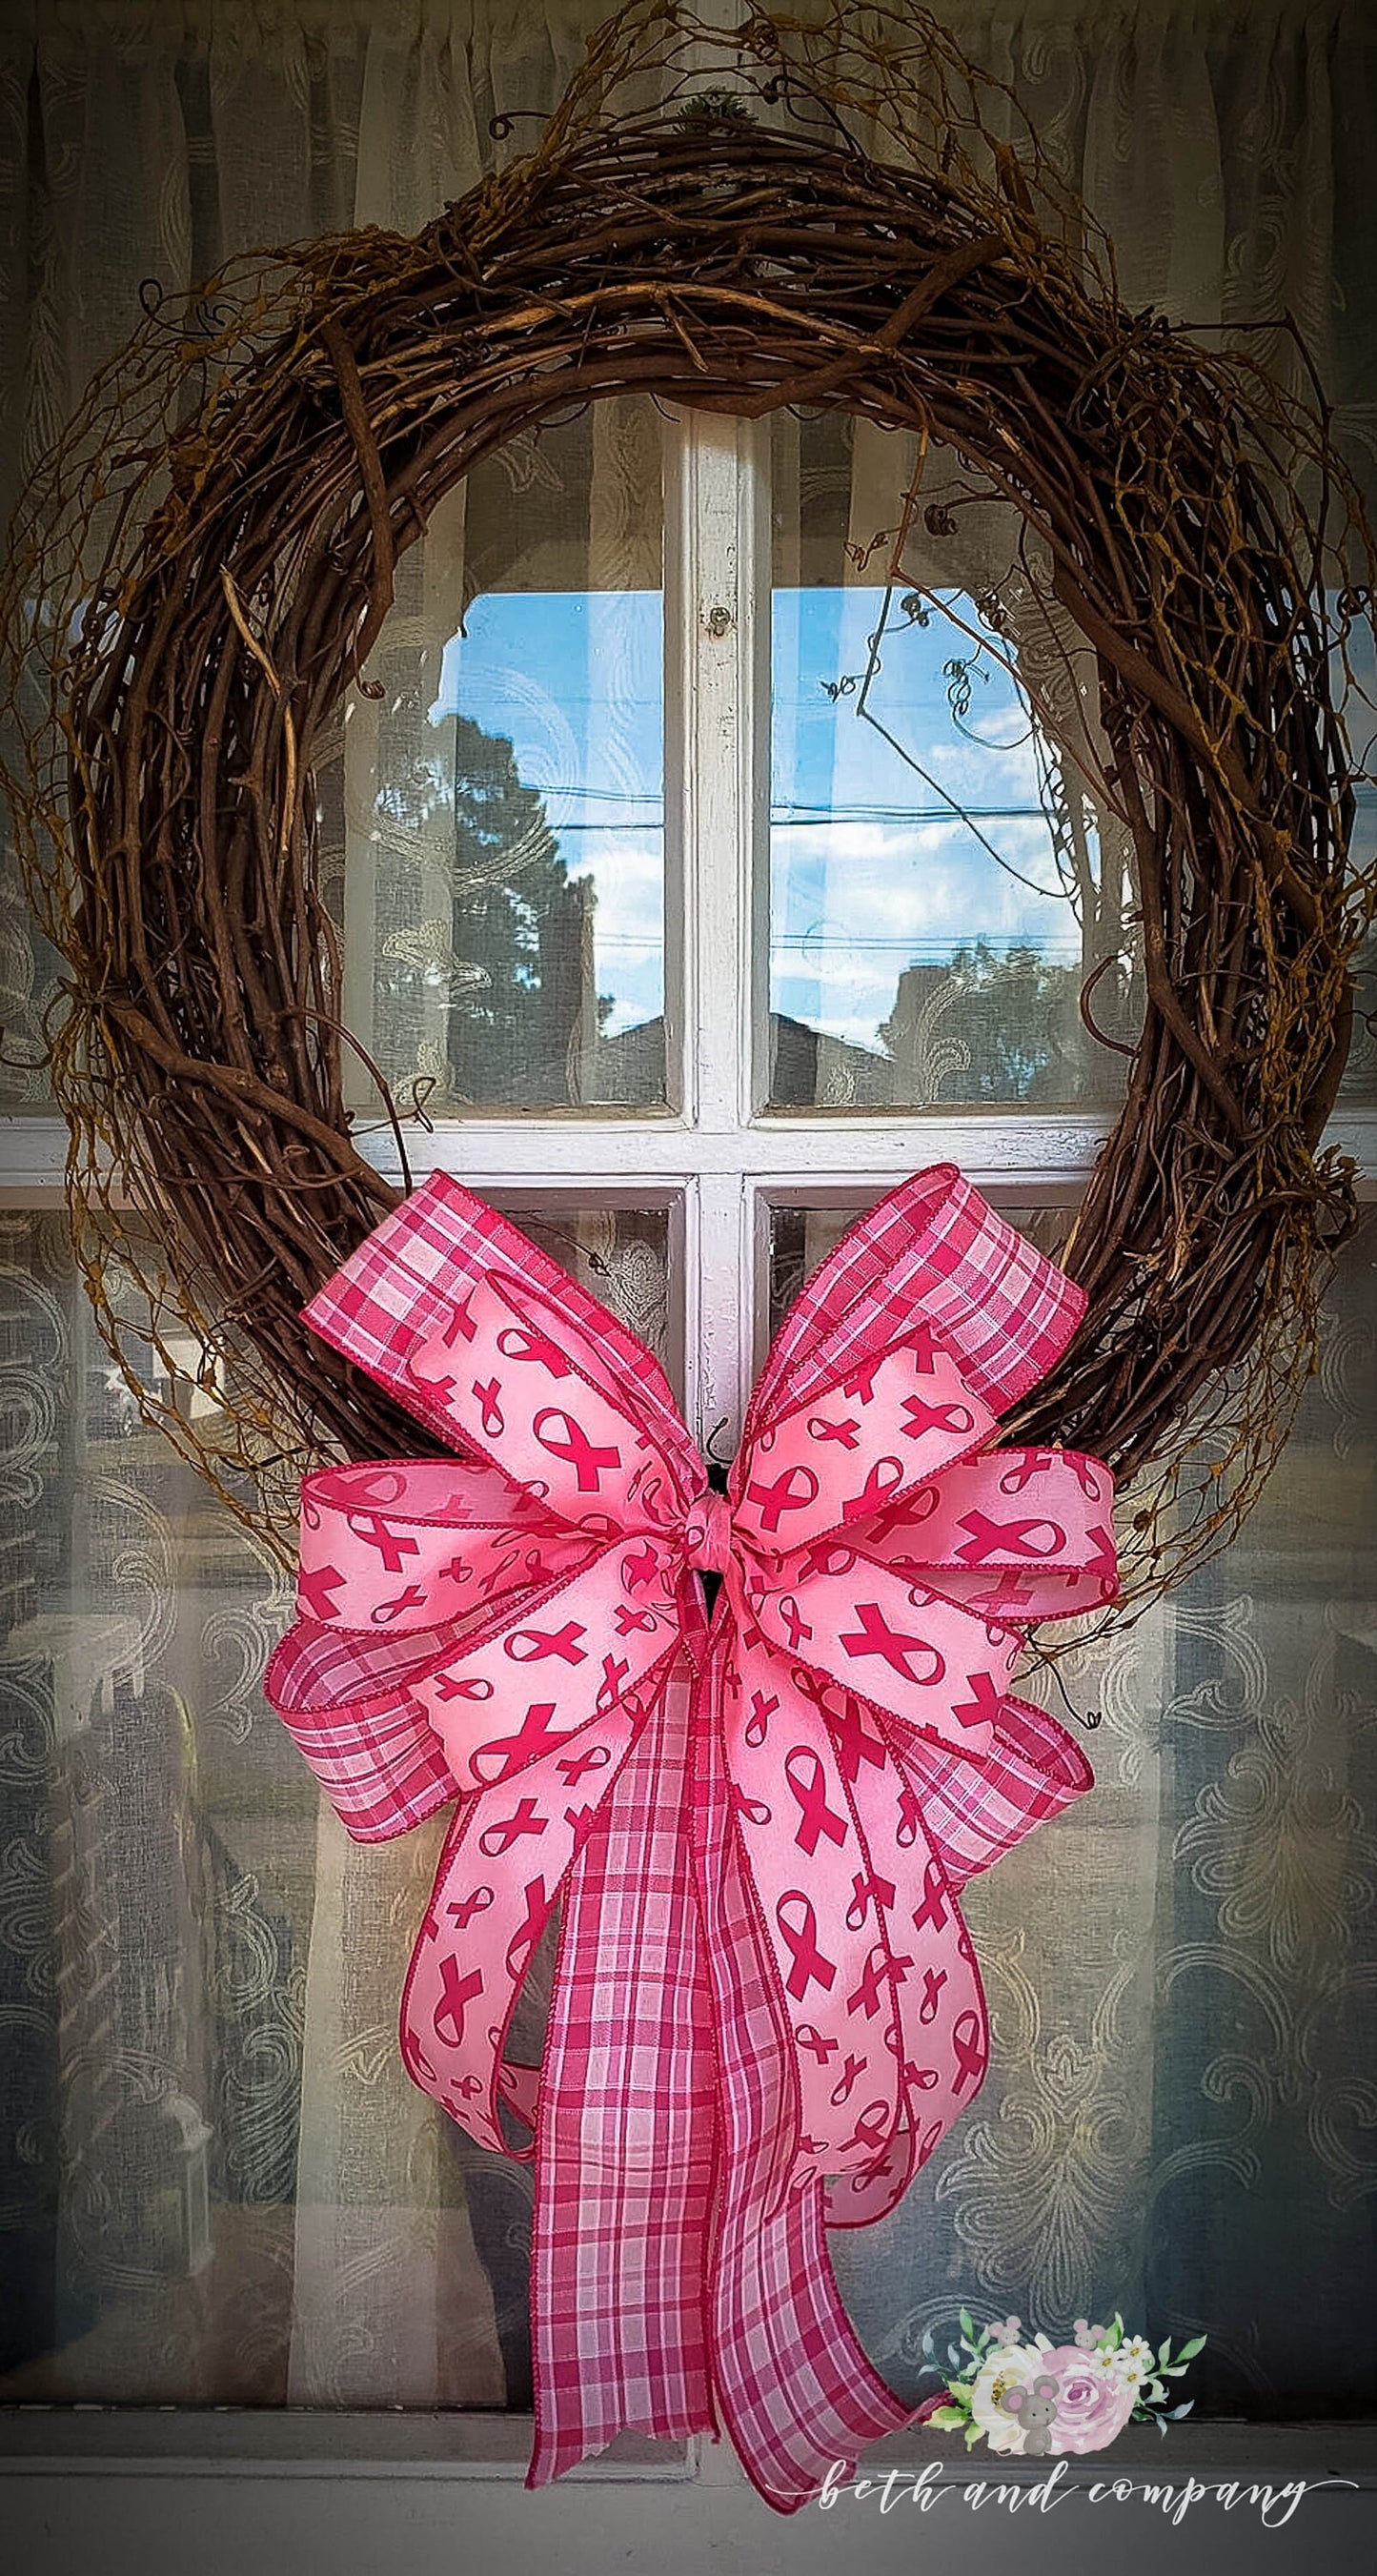 Breast Cancer Awareness Wreath Bow